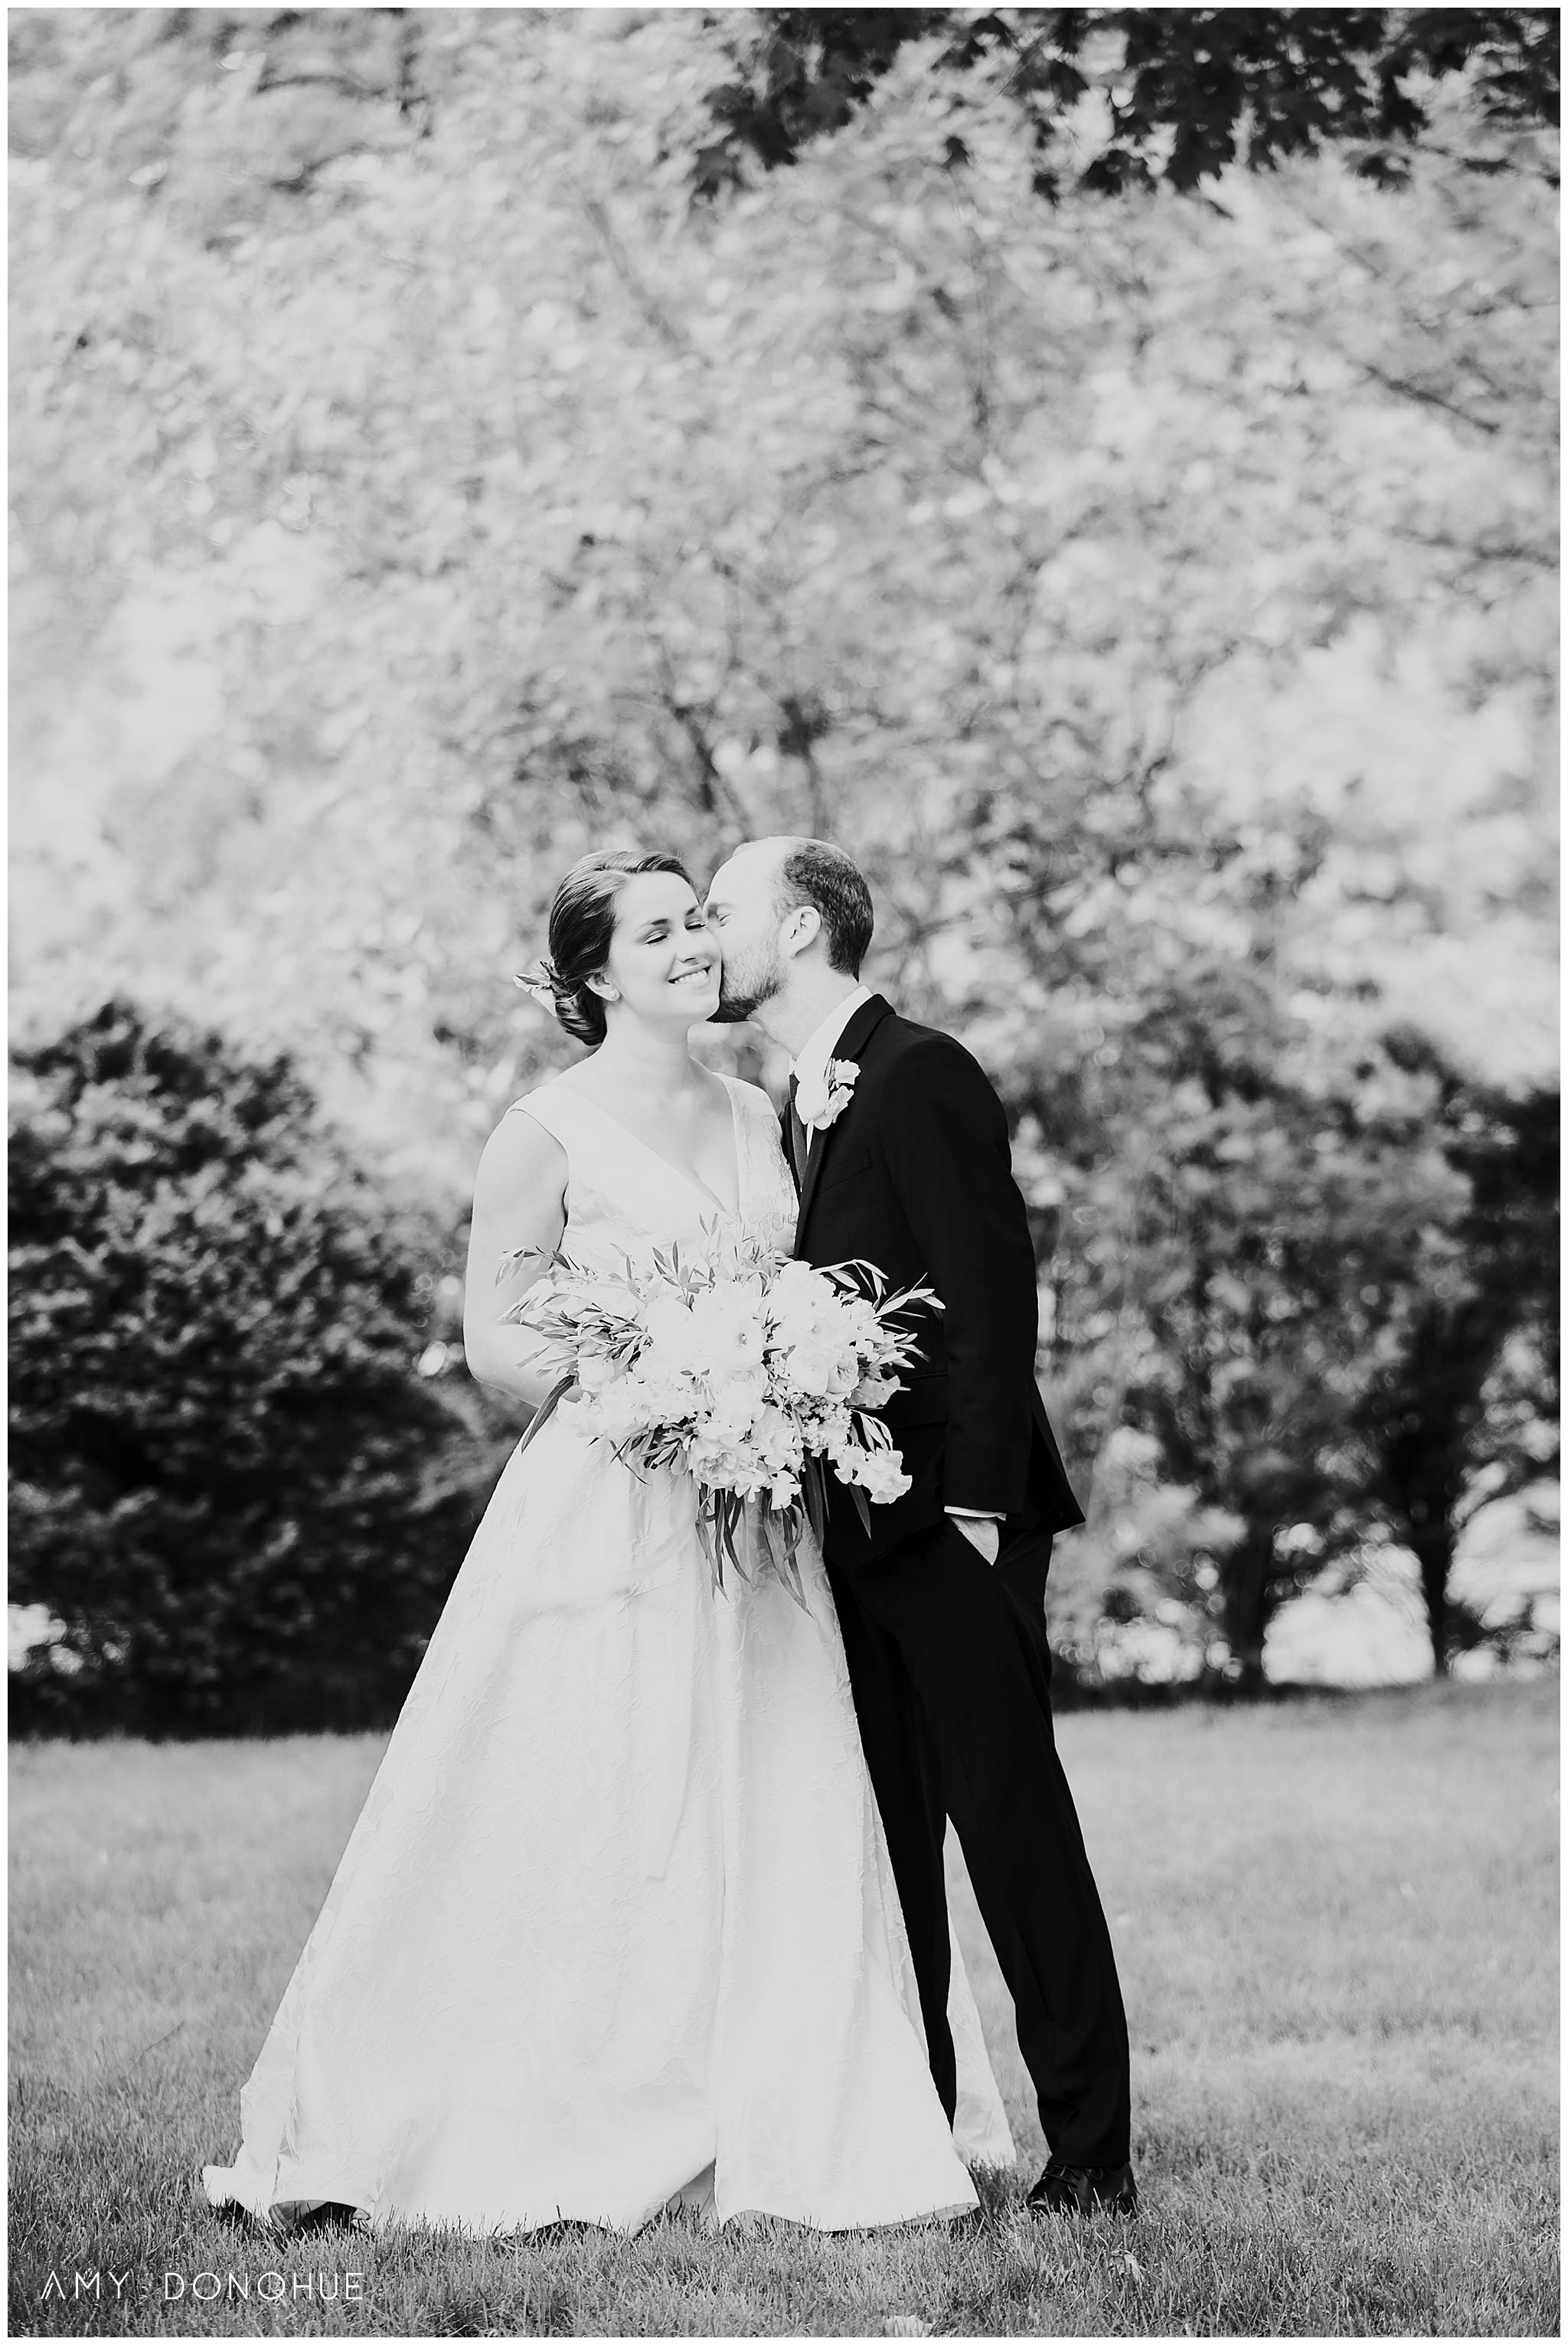 Black and White wedding photo of the couple at The Woodstock Inn & Resort